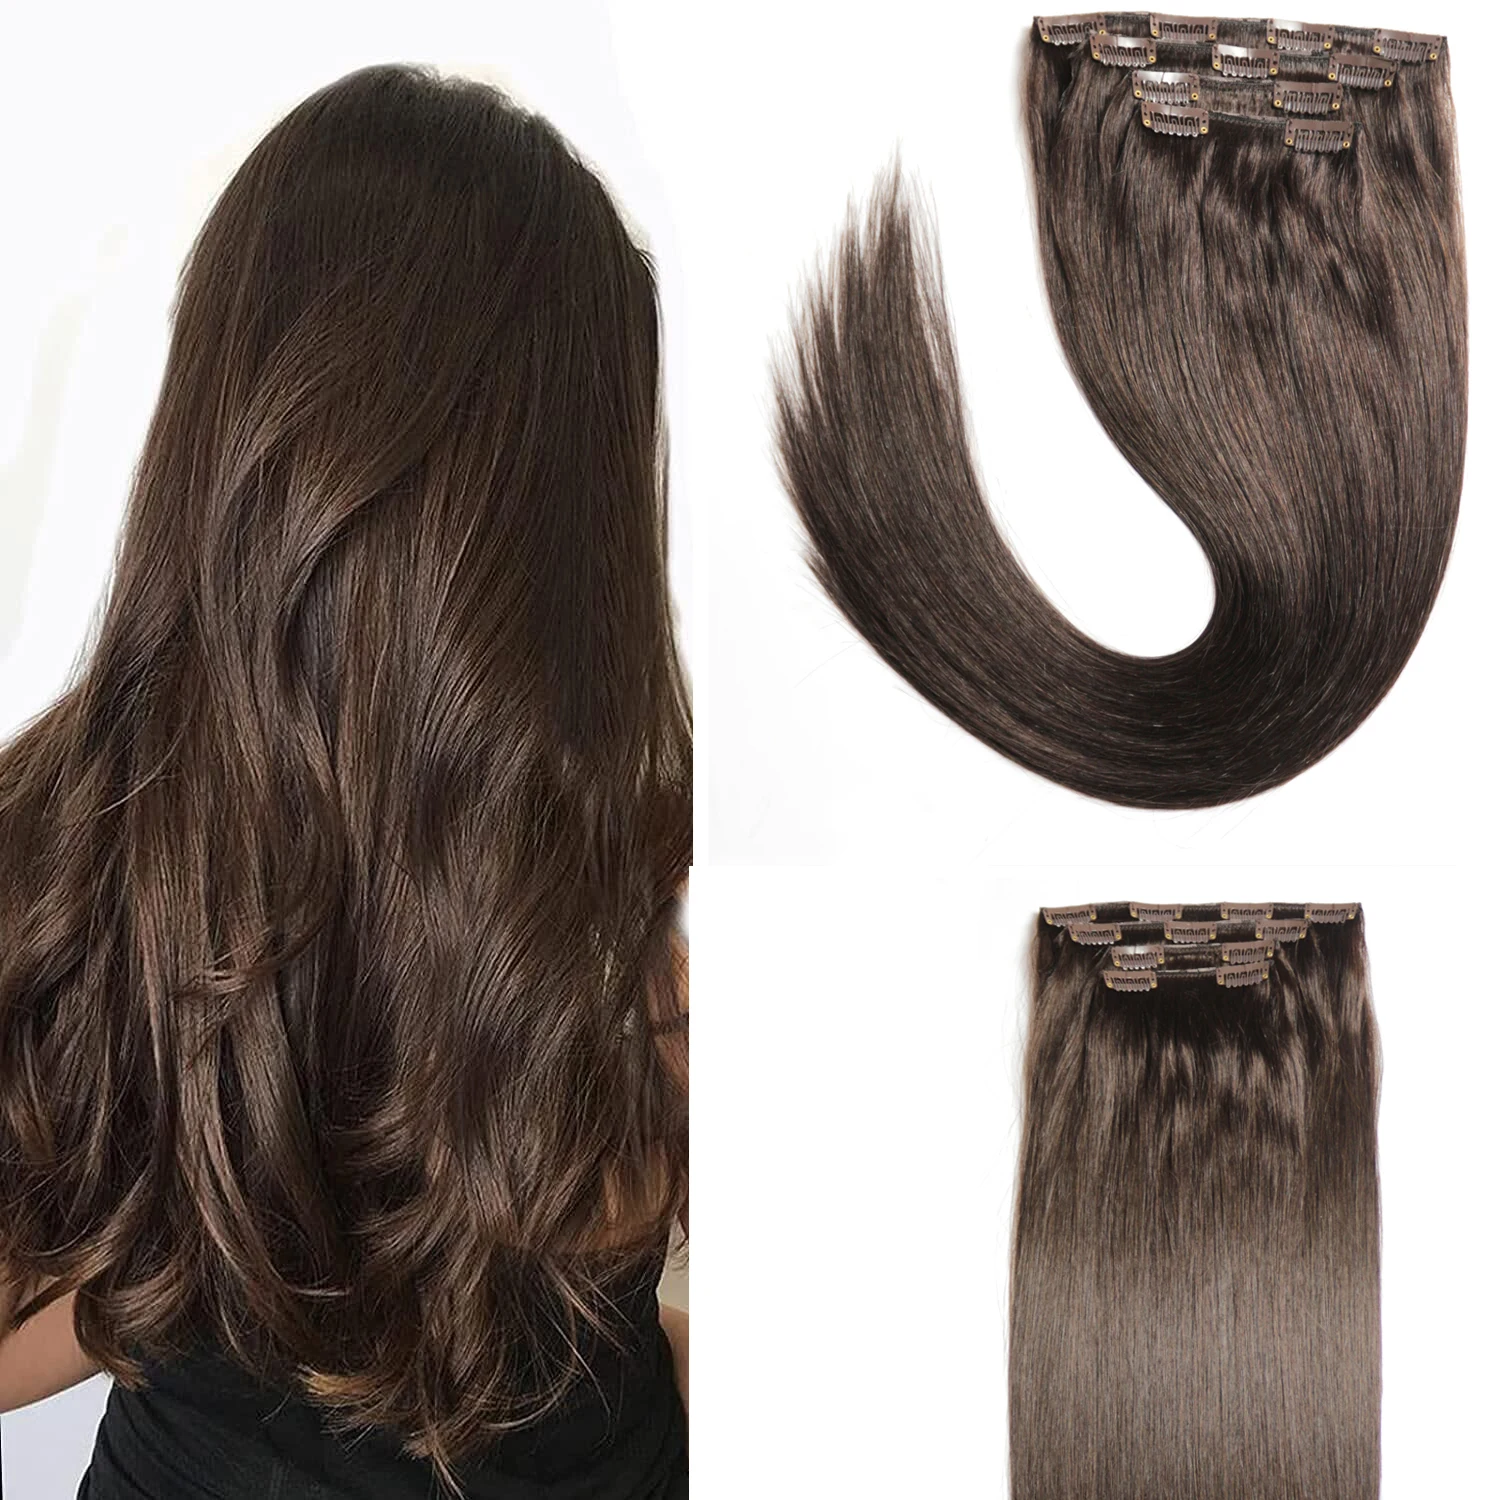 

Chocala 20"-28" Brazilian Remy Hair Clip in Human Extensions 100g-220g 4pcs Set With 100% Real Human Hair